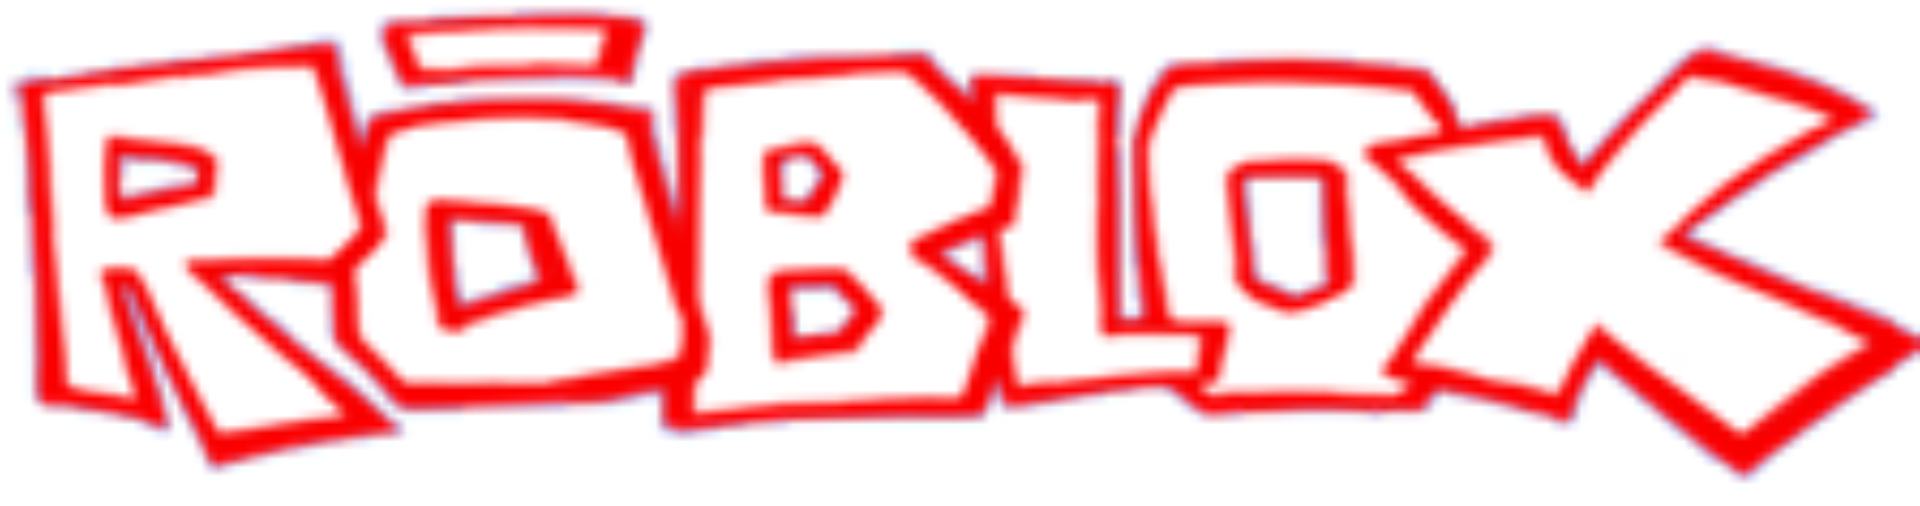 A Complete History Of The Roblox Logo Pocket Tactics - old roblox logo 2004 roblox